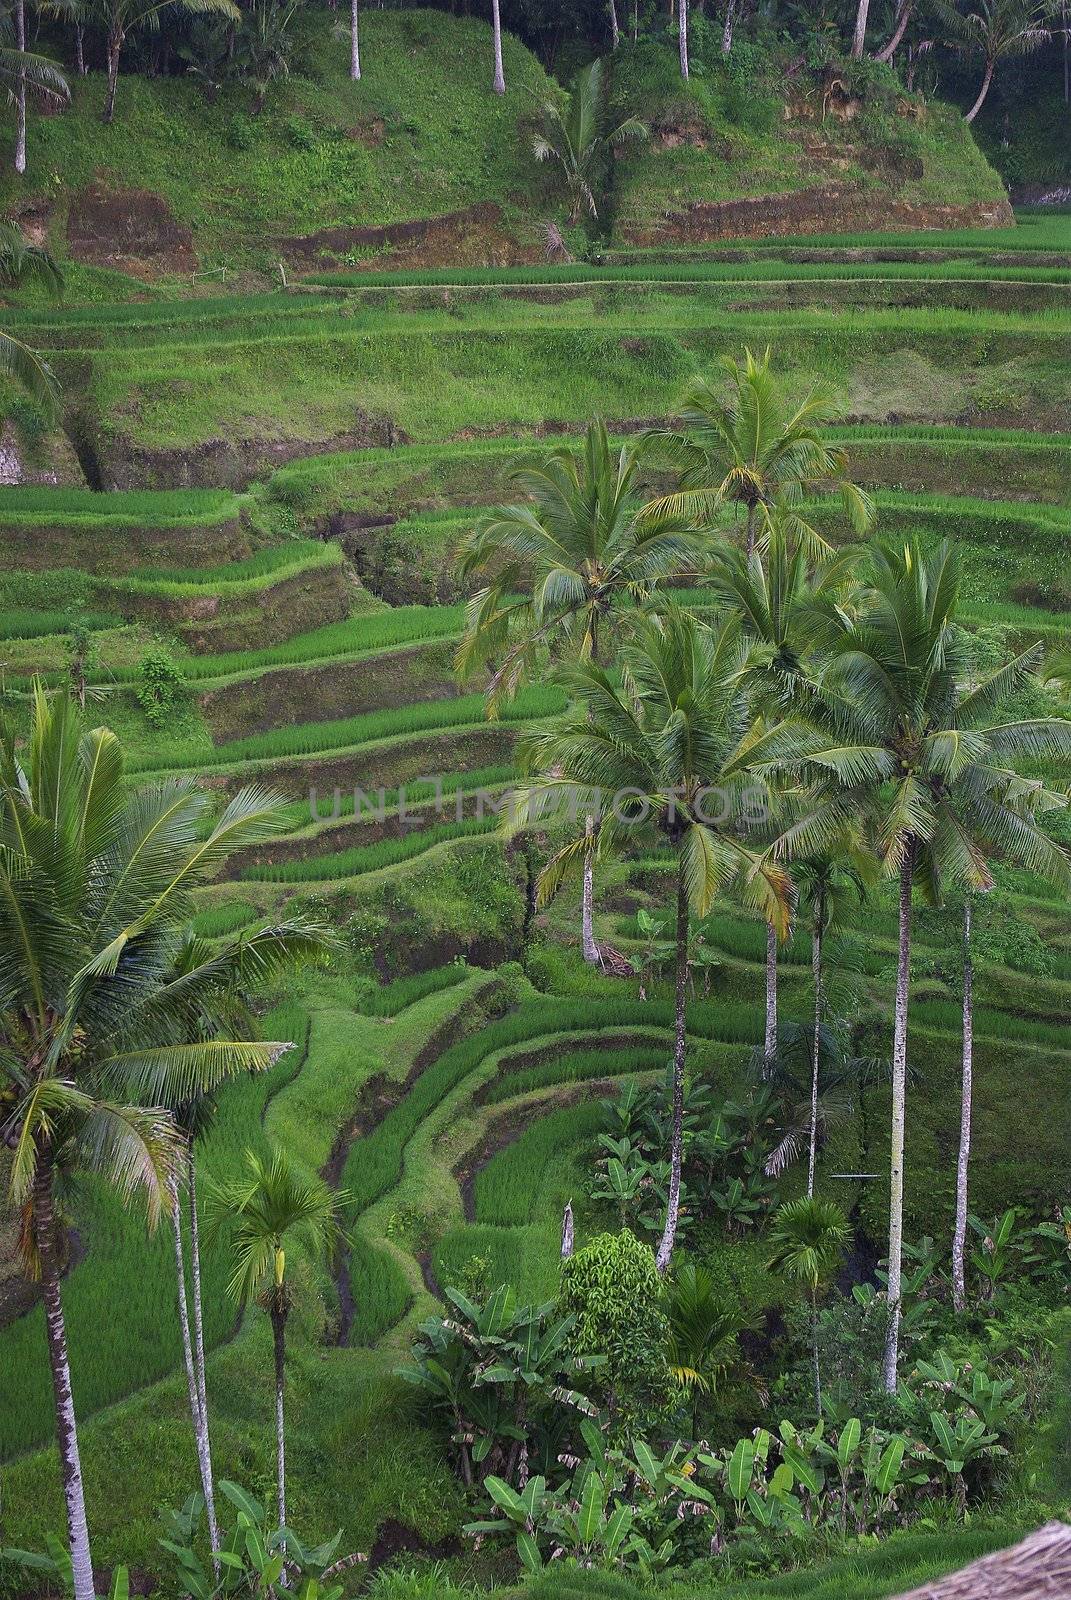 Many terrace ricefields and palms trees in Bali by shkyo30